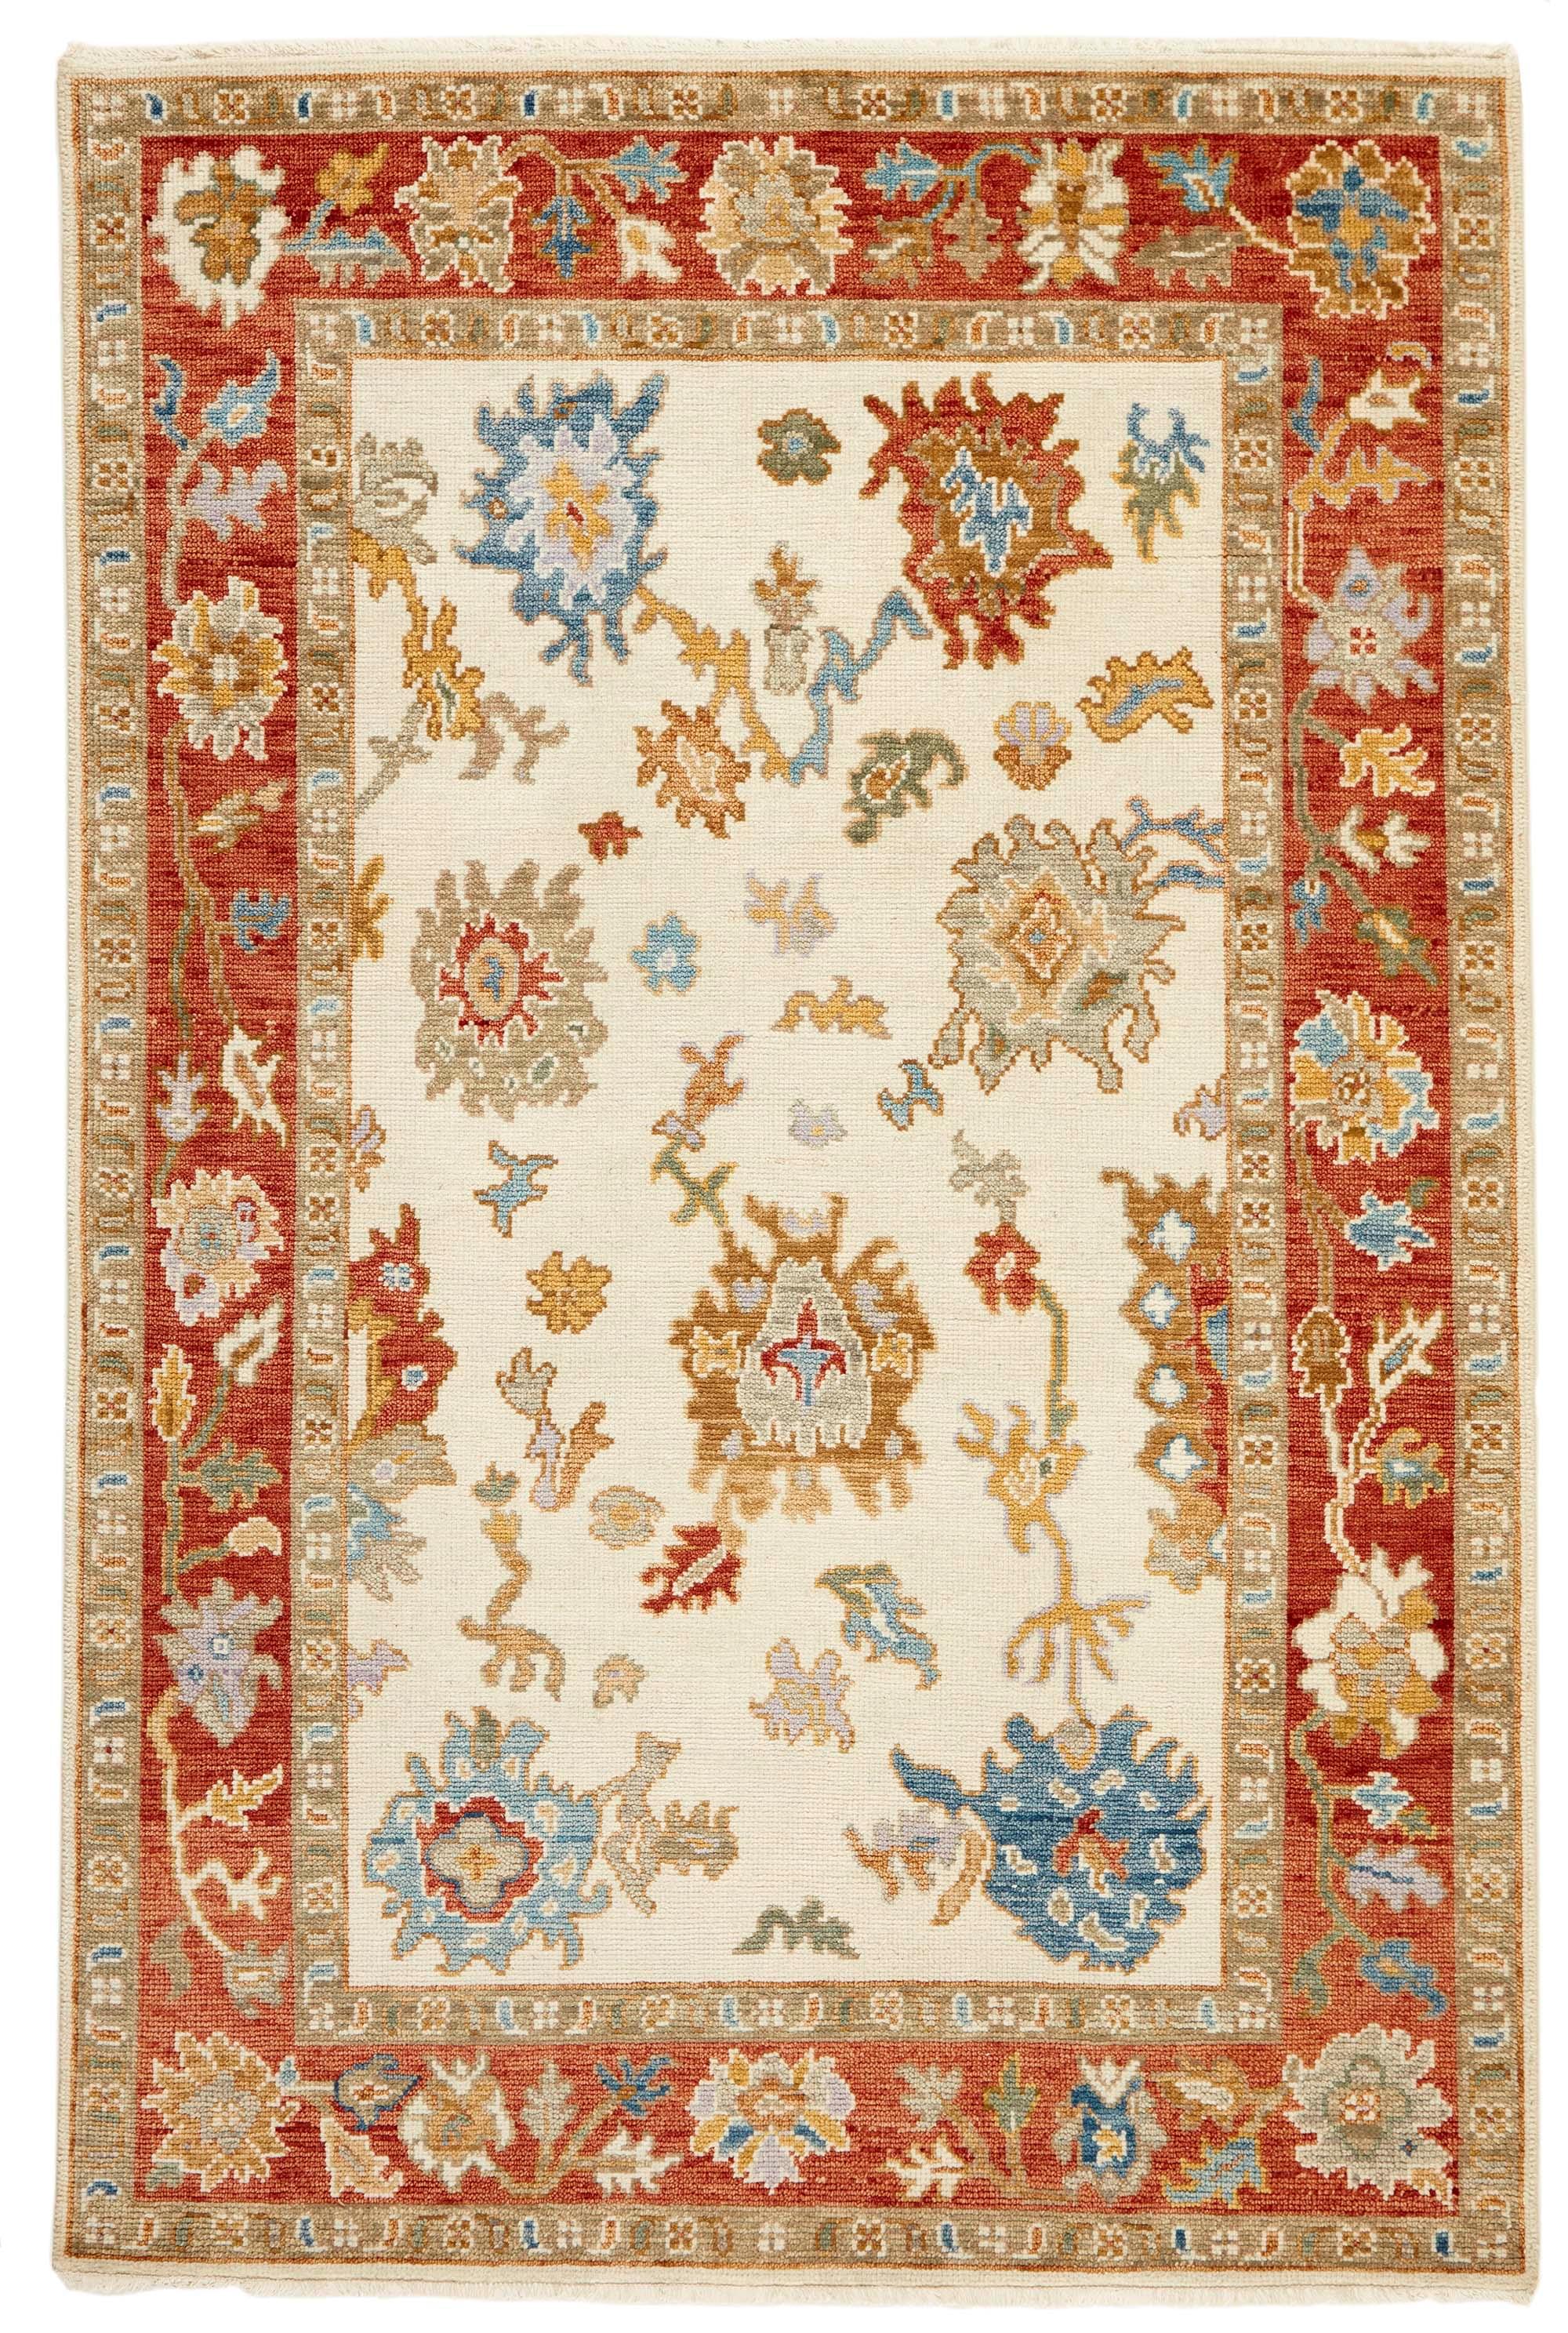 authentic Oriental rug with traditional motifs in red, yellow, blue, green, purple, beige and brown